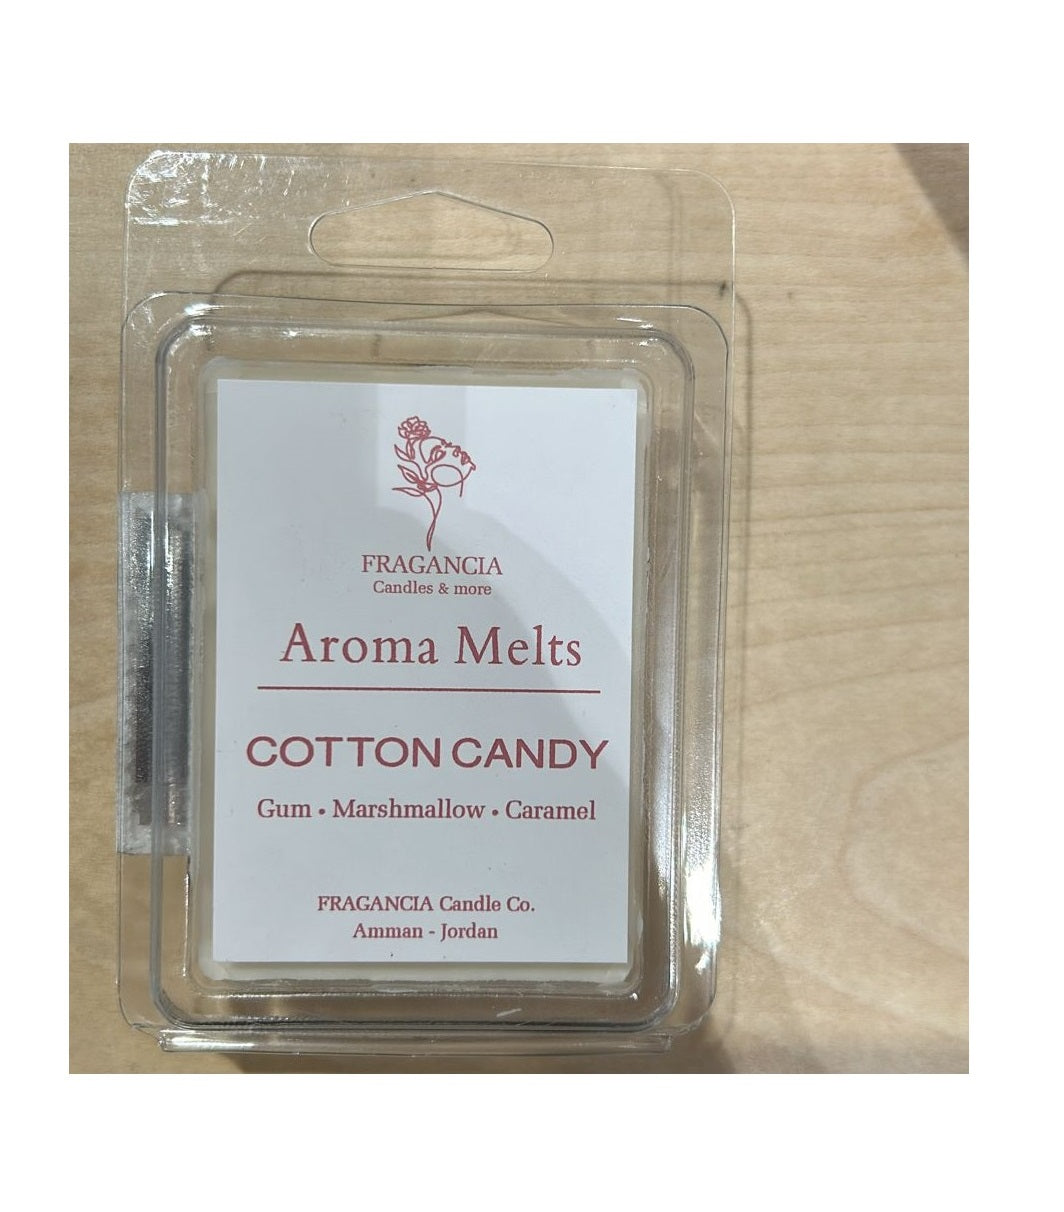 Fragancia Aroma Melts Cotton Candy Burning 24 HRs 80 ml